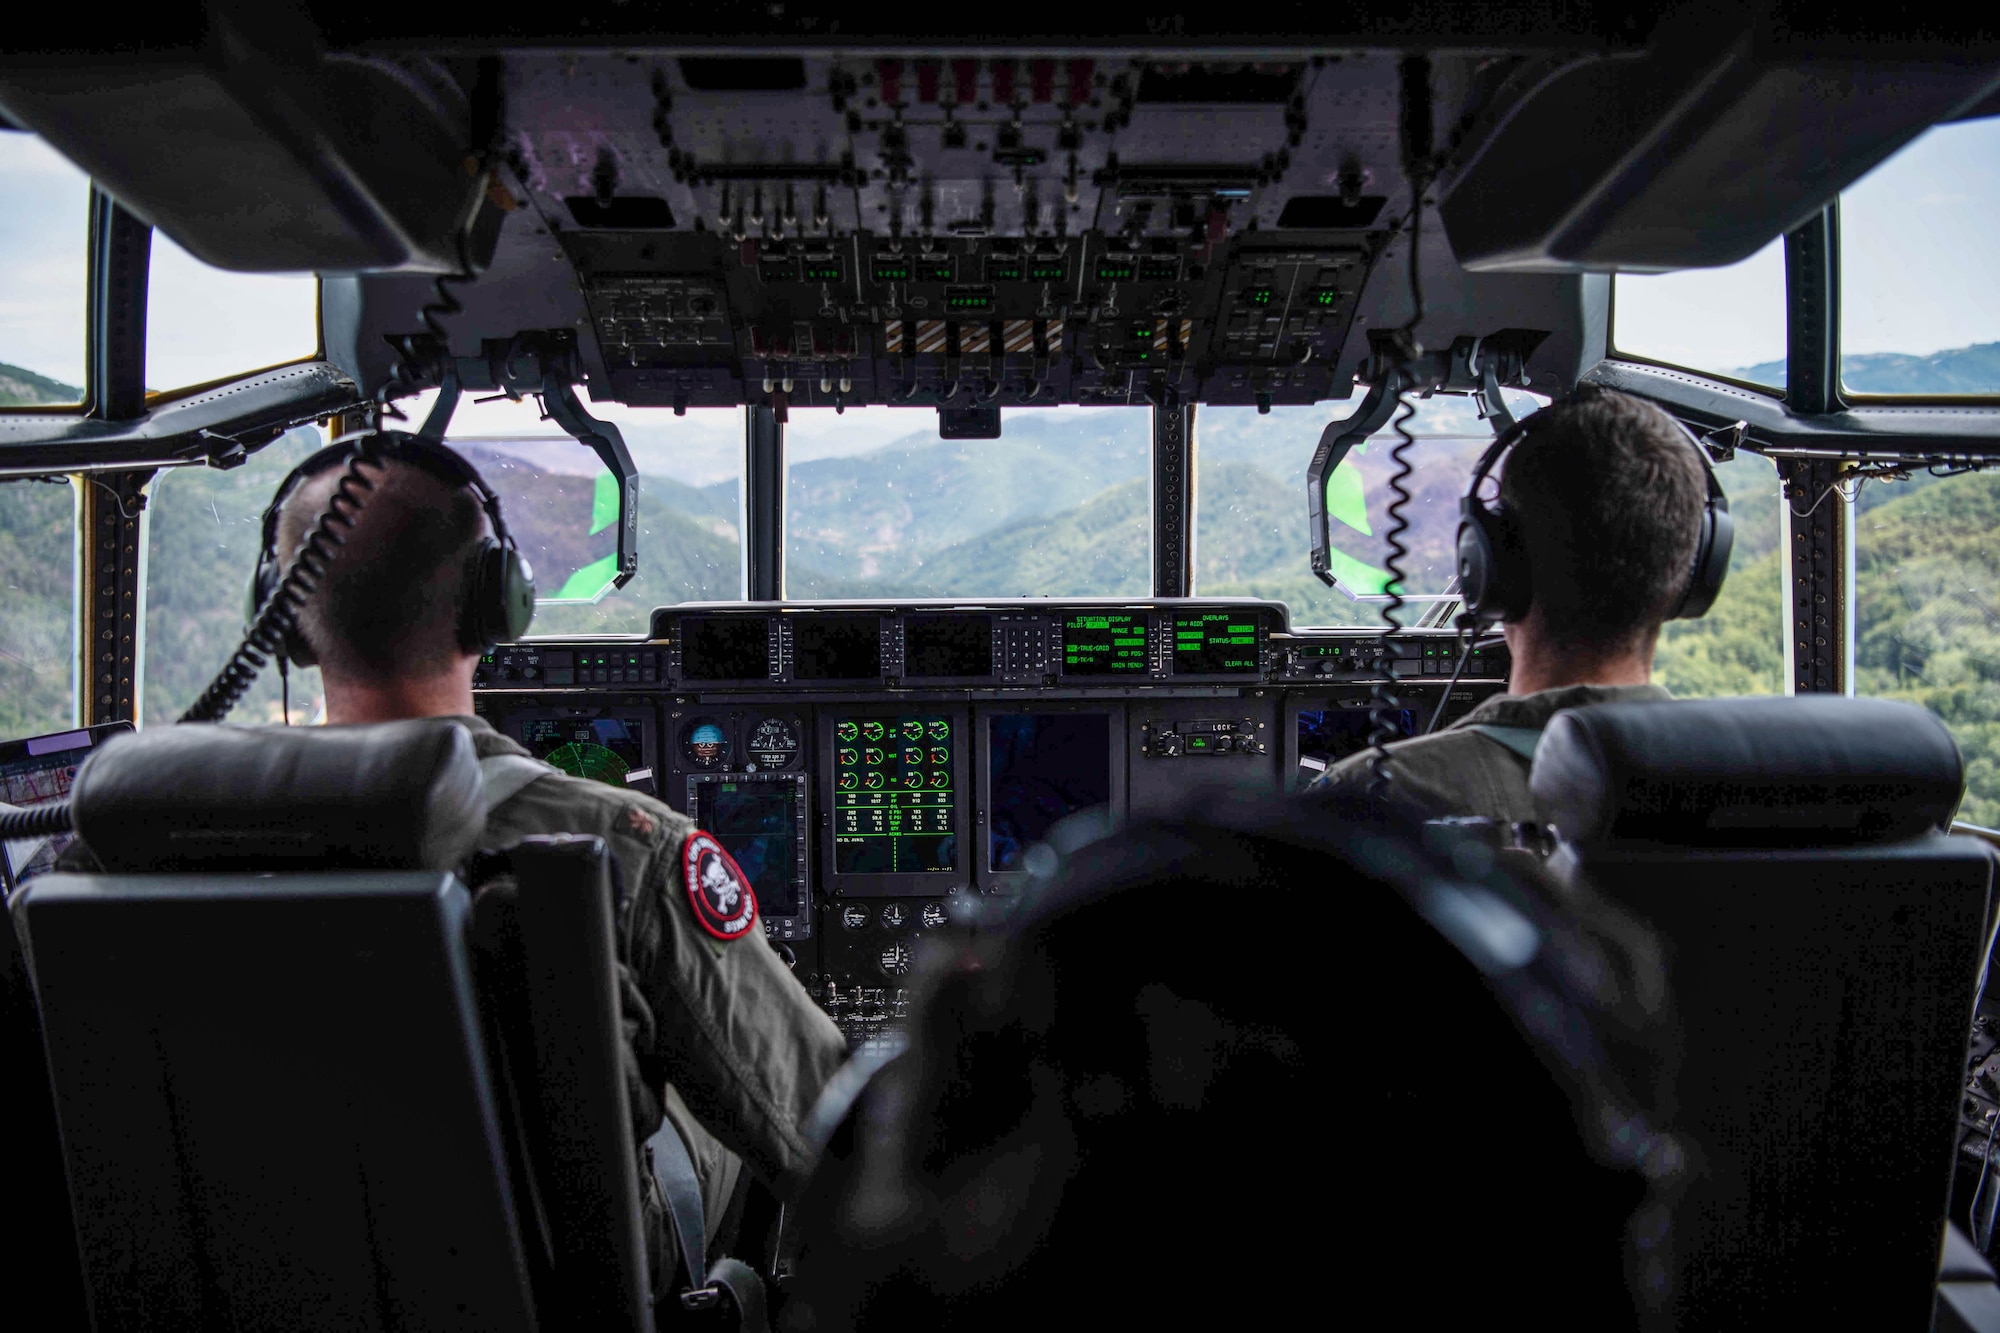 U.S. Air Force Maj. Benjamin Walker, 37th Airlift Squadron C-130J Super Hercules aircraft pilot, and 1st Lt. Brendan Towlson, 37th AS C-130J pilot, performs low level flying maneuvers over Bulgarian mountain ranges during Thracian Summer 2023 out of Bezmer Air Base, Bulgaria, Aug. 9, 2023.